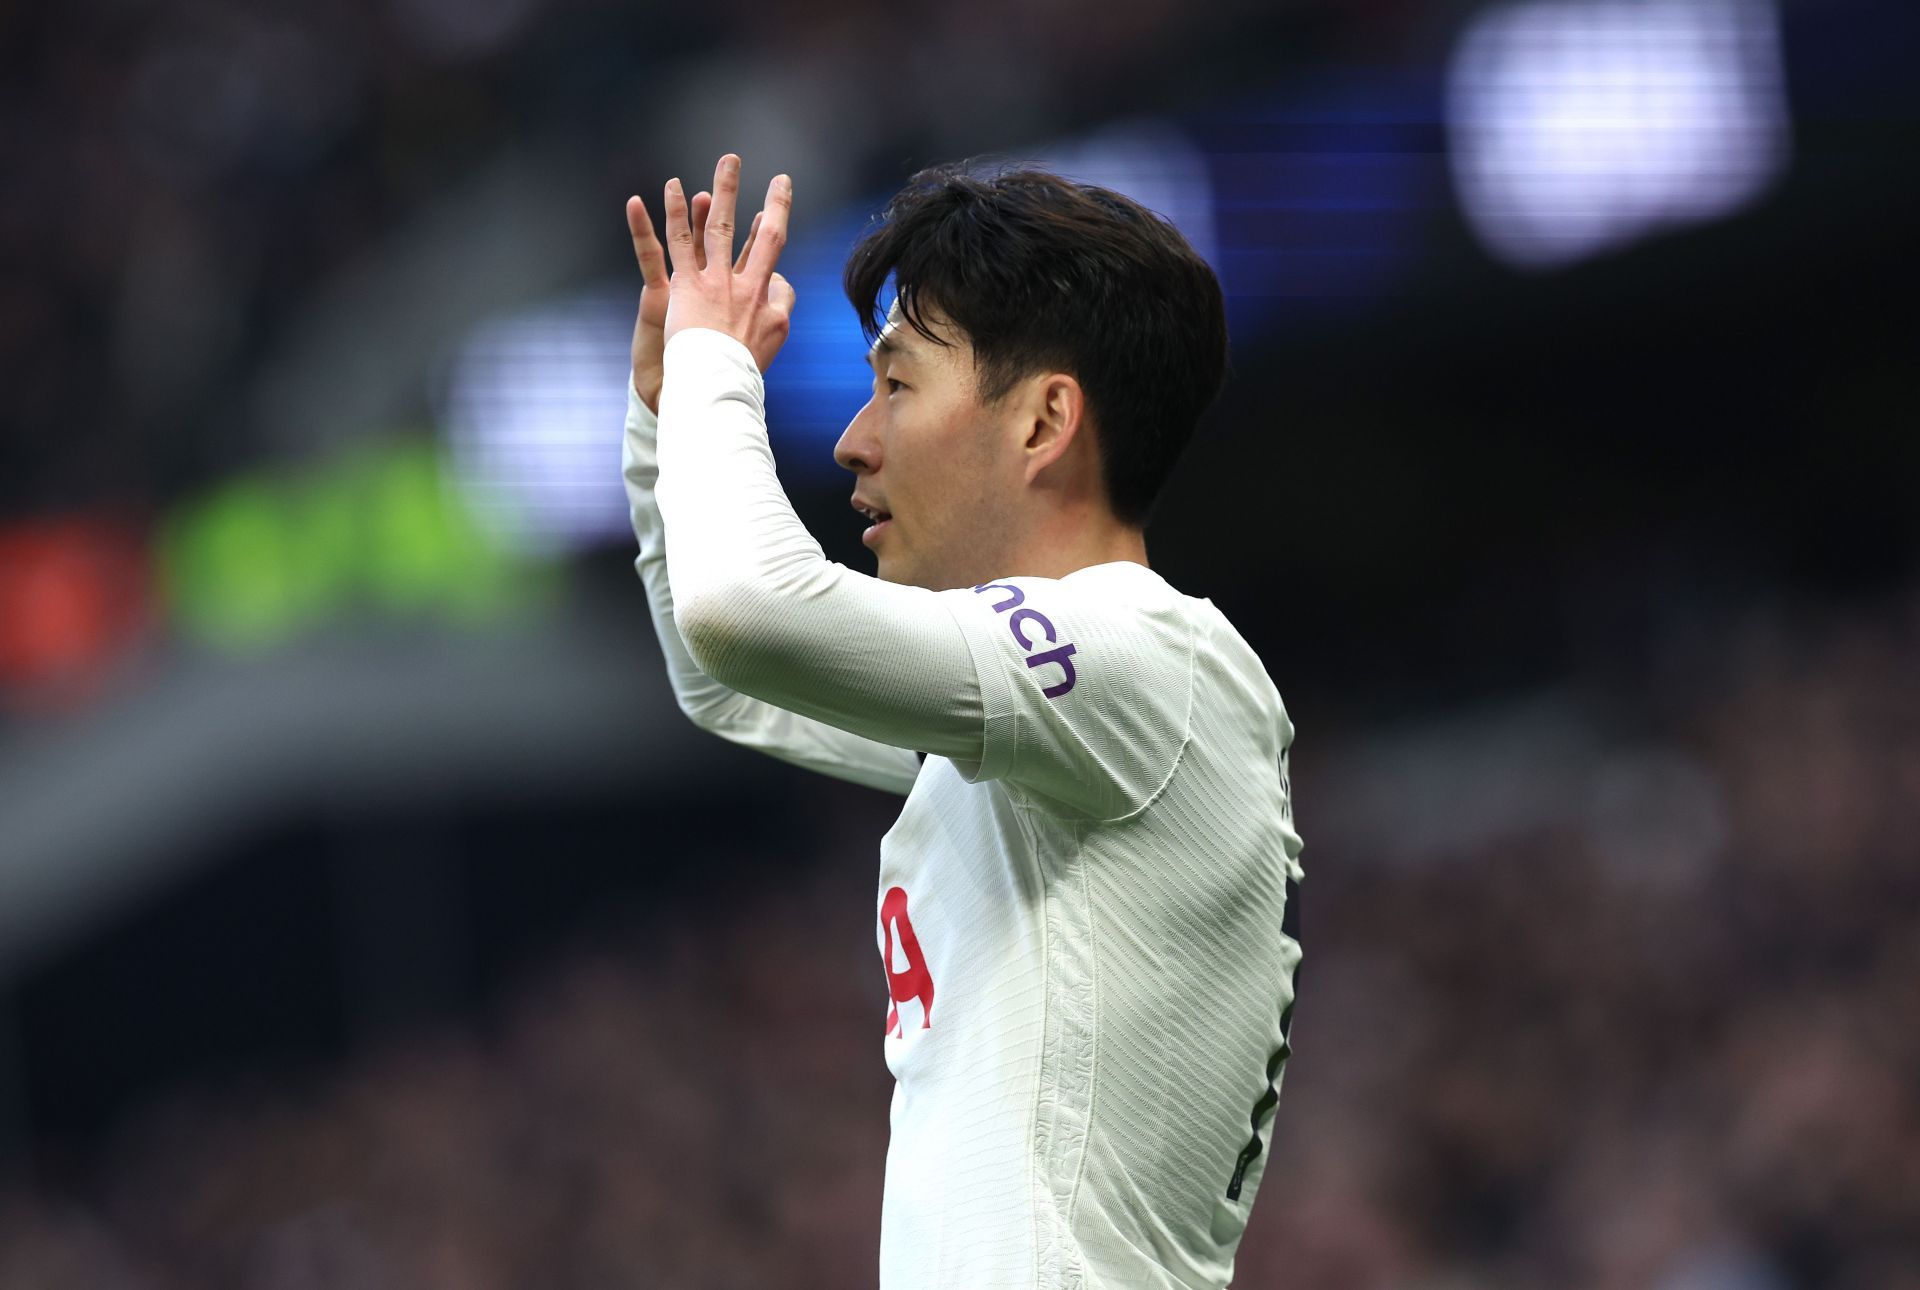 Heung Min Son has been a ray of sunshine for Tottenham Hotspur